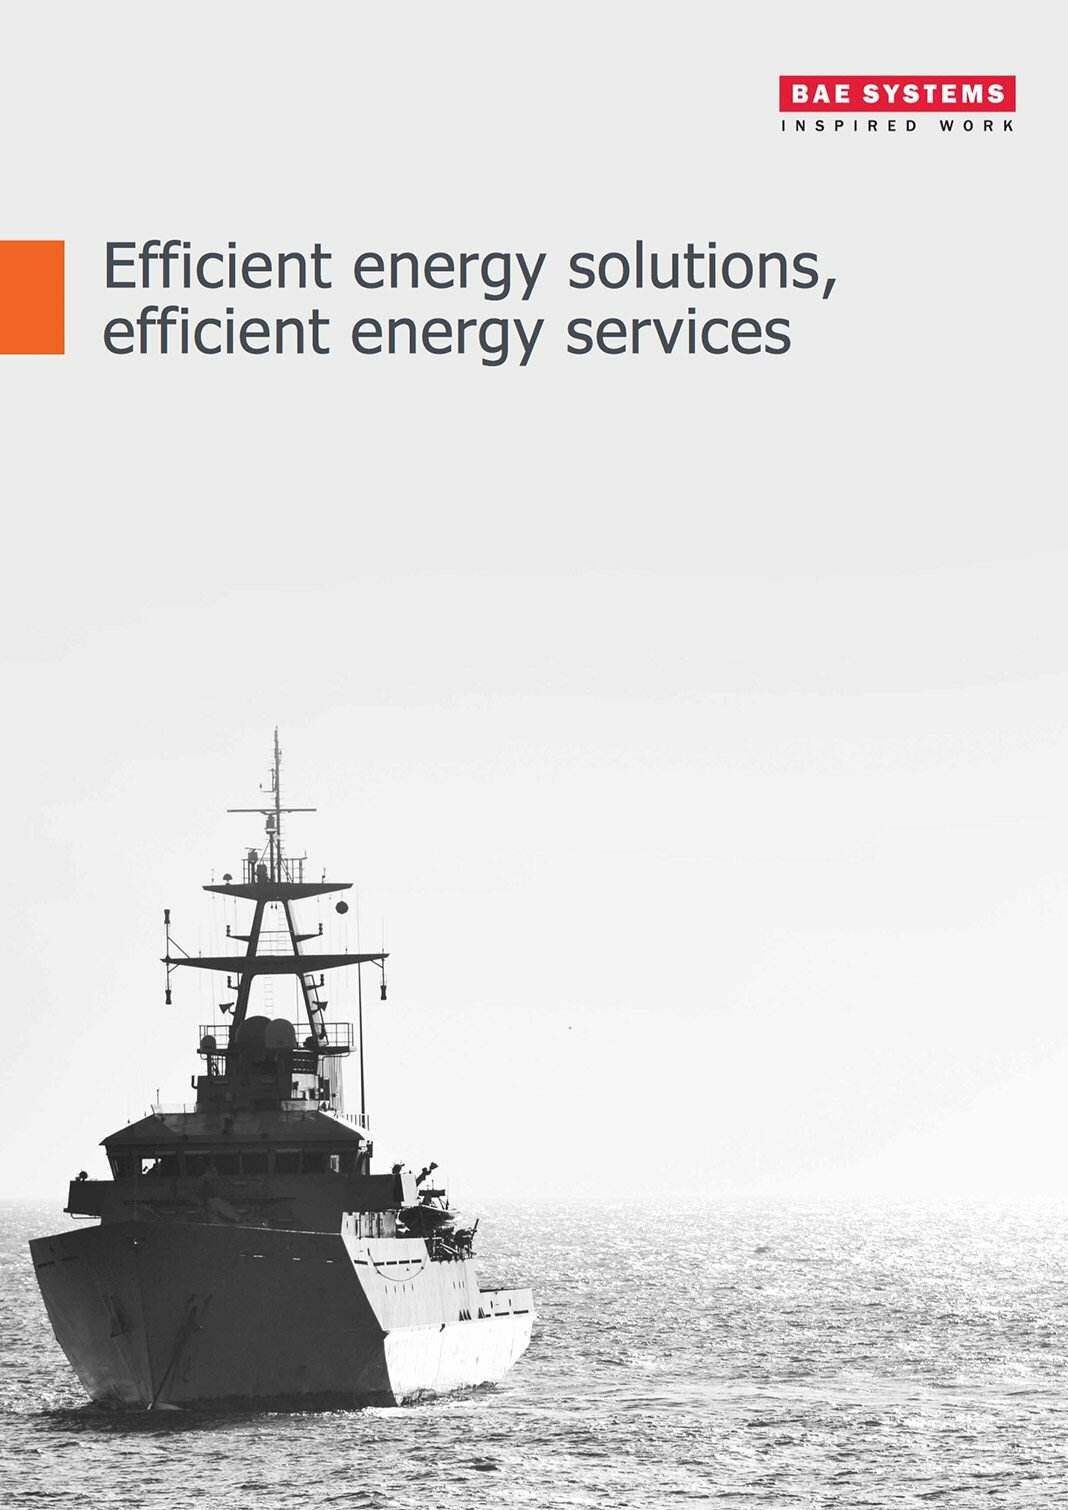 BAE Systems | Energy efficient military solutions